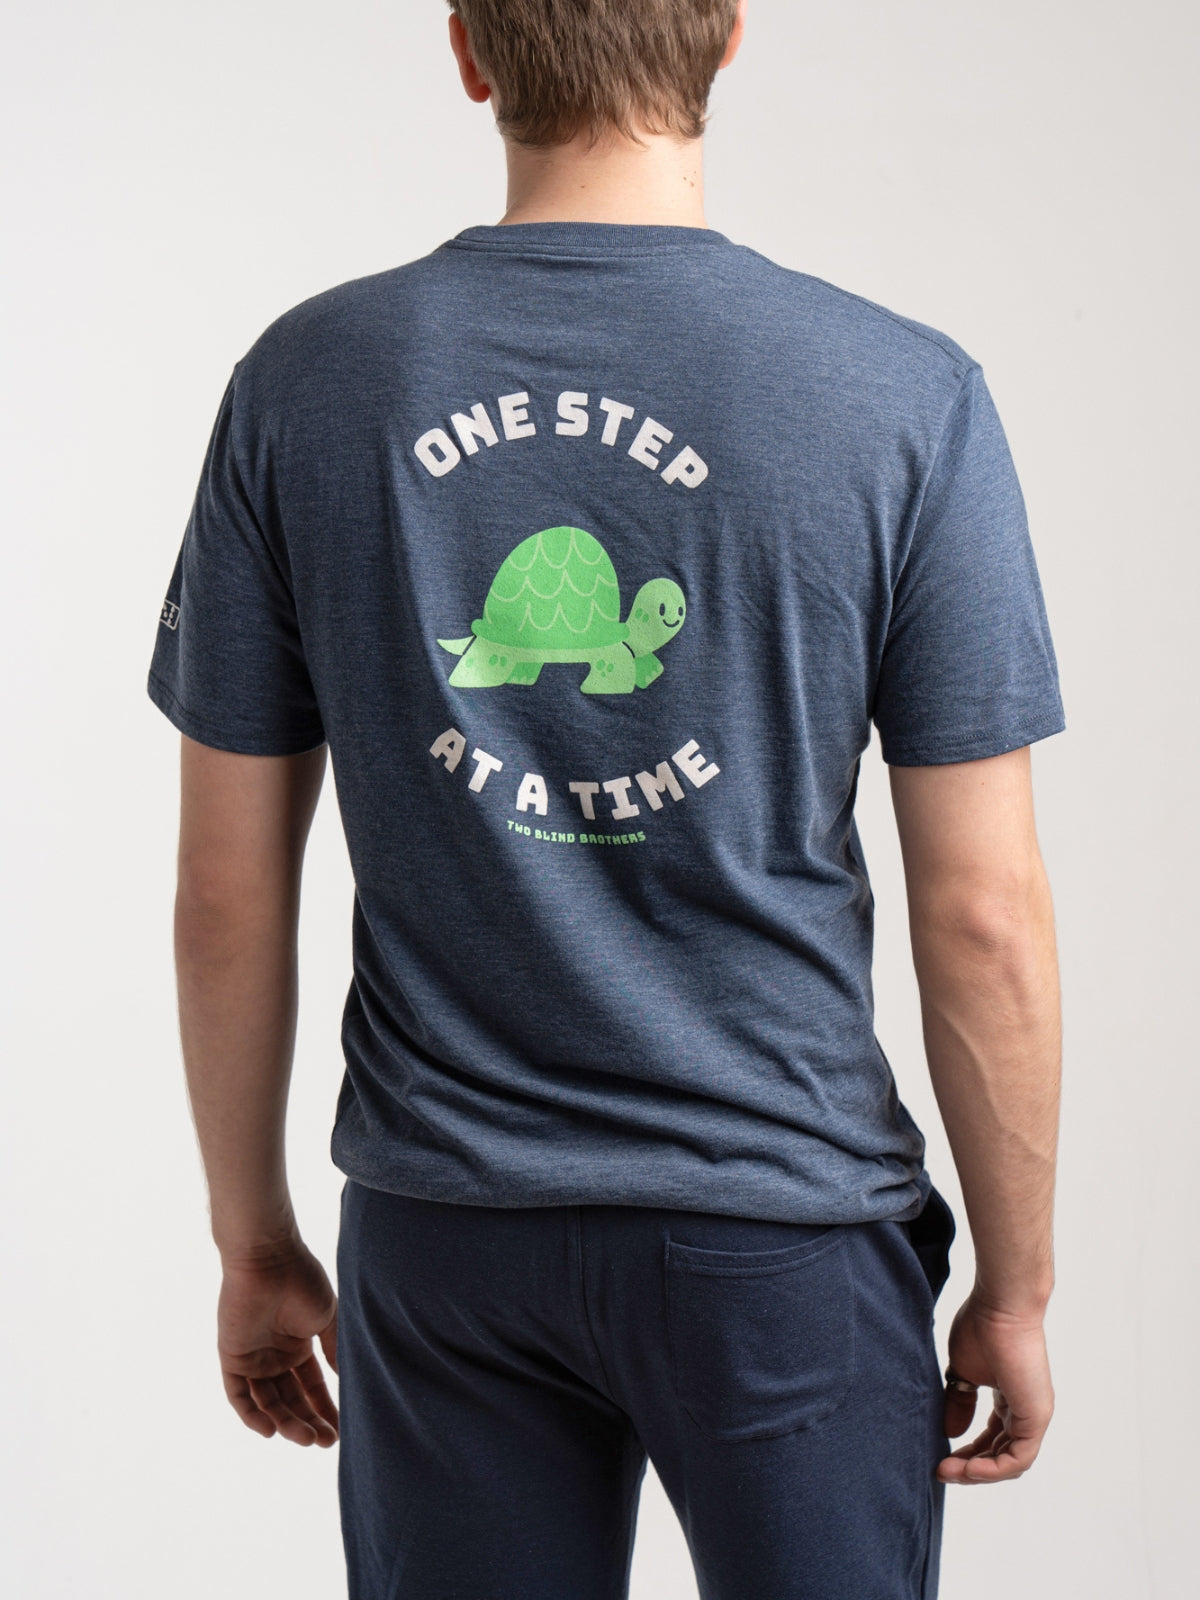 Two Blind Brothers - Mens Men's "One Step at a Time" Graphic Crewneck Navy